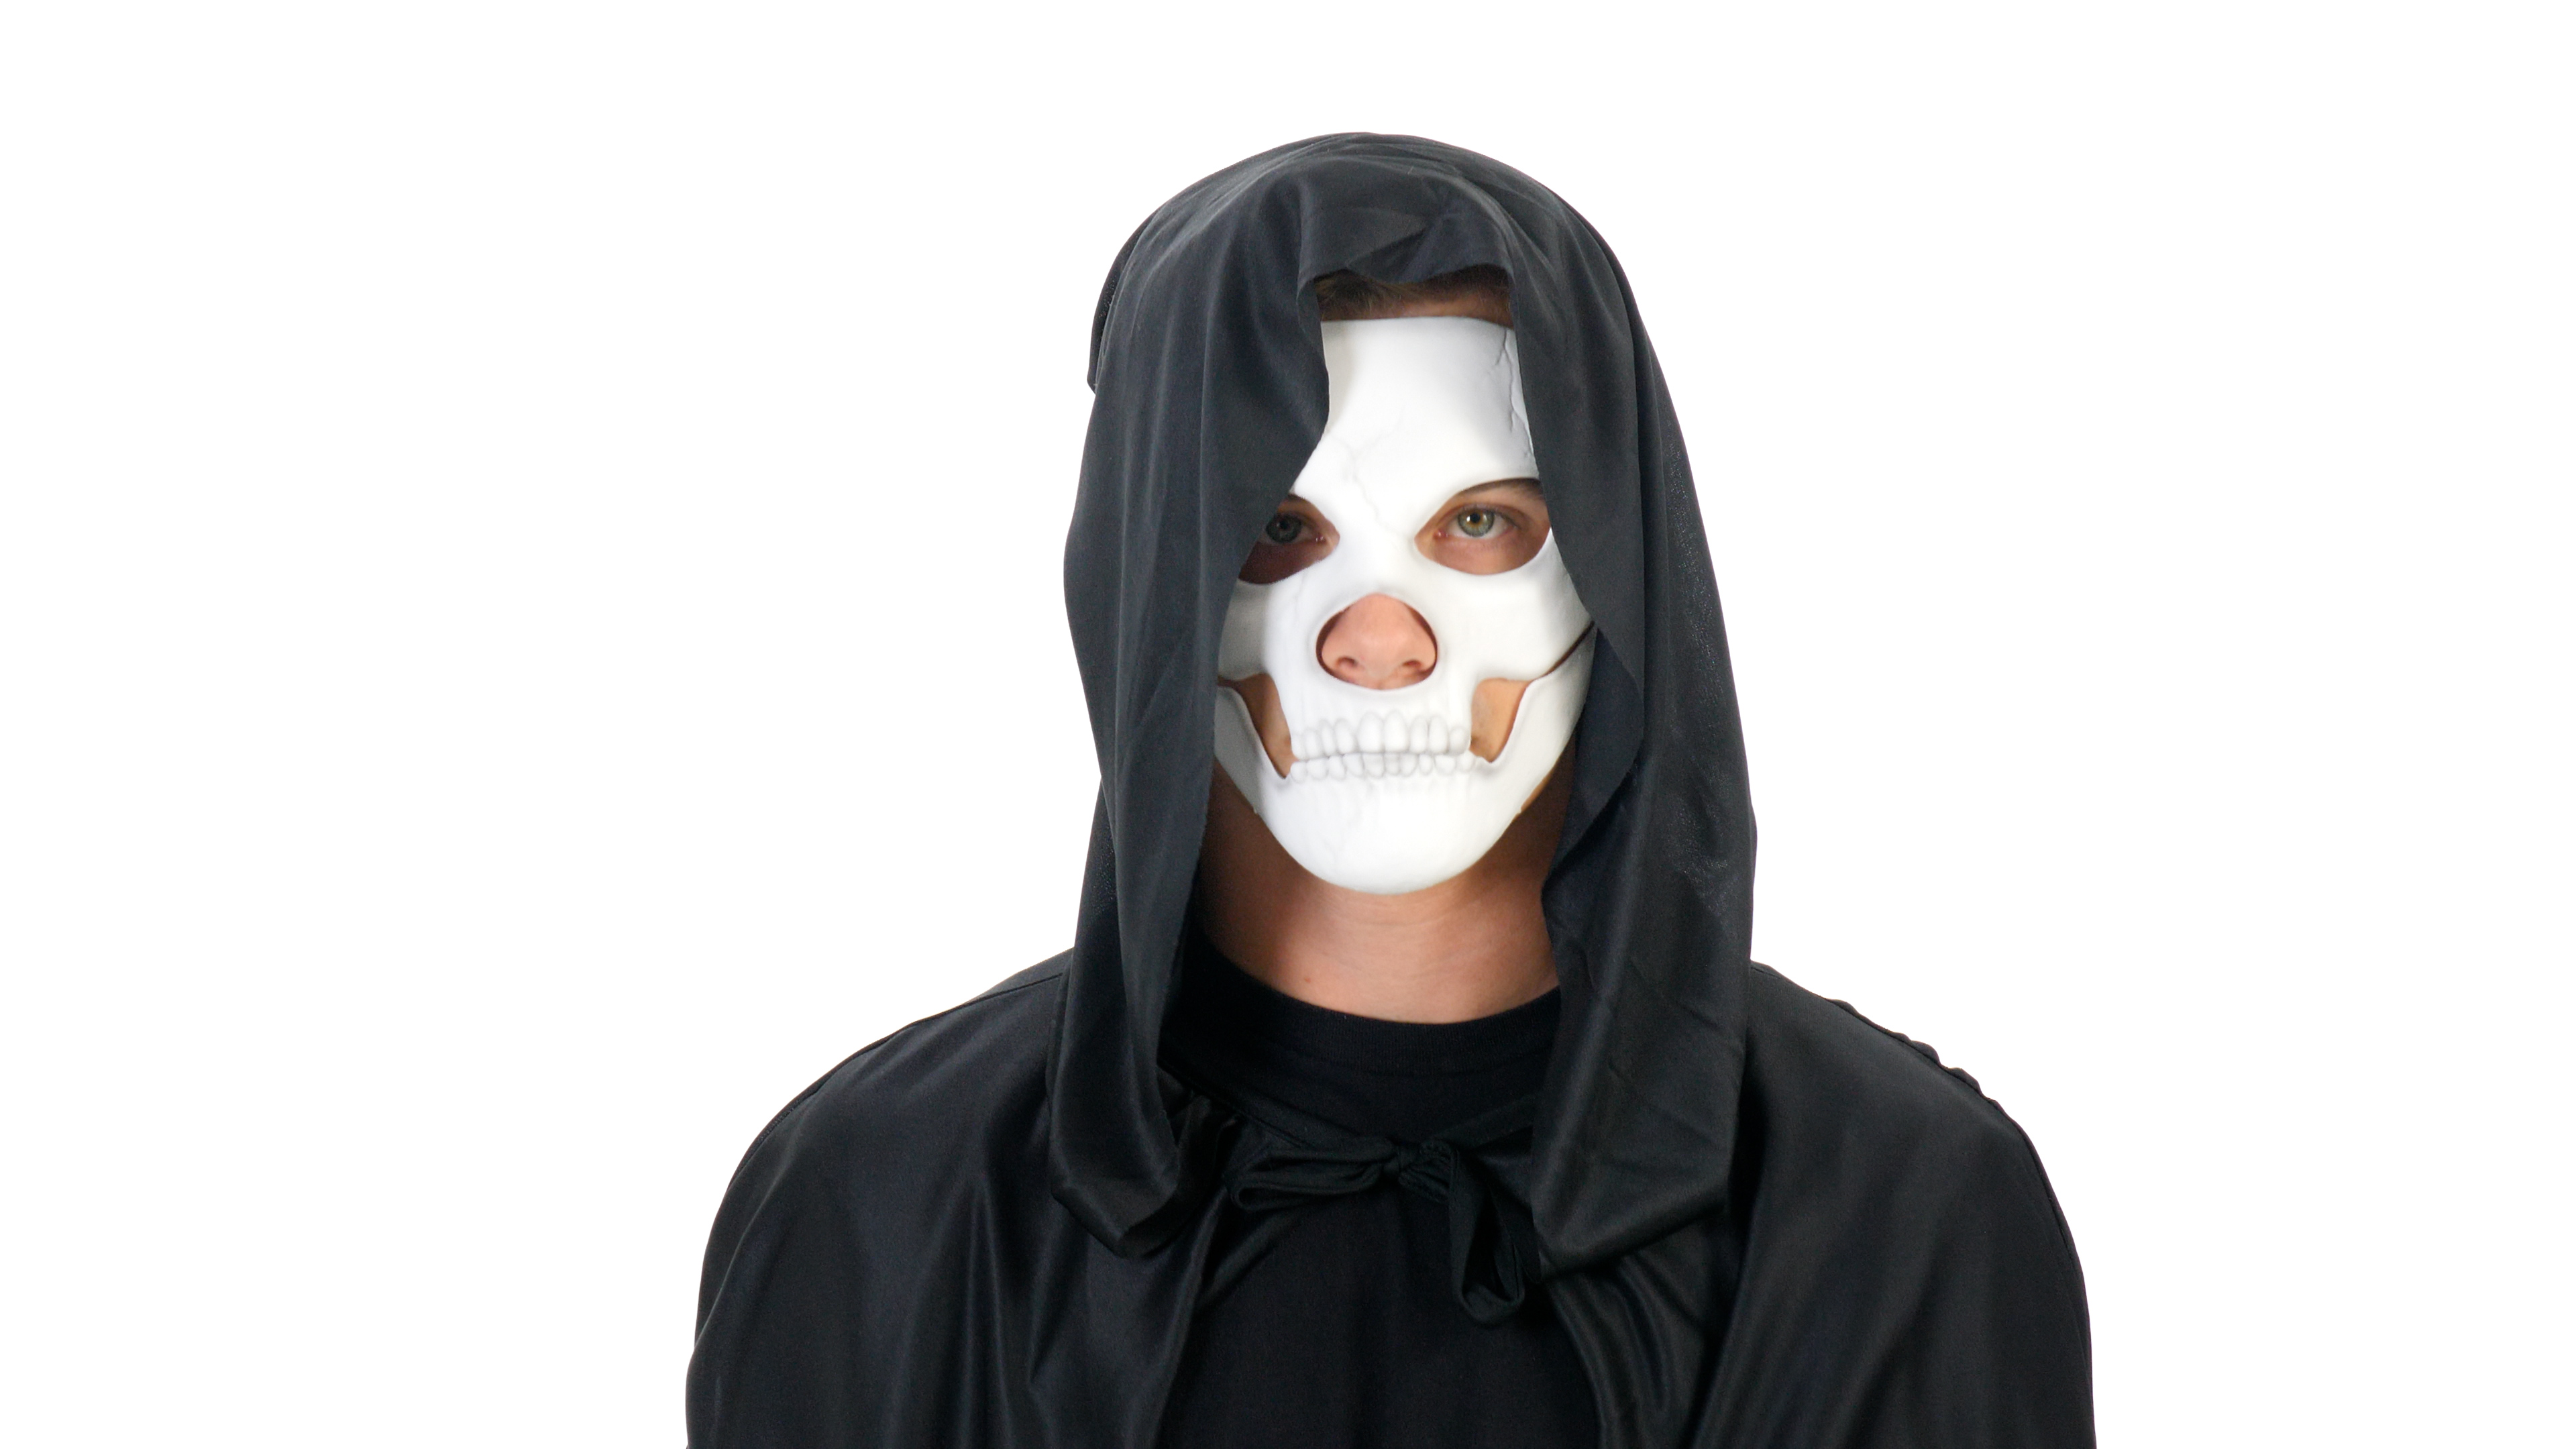 STSKW101M Self-Adhering Skeleton Costume Mask with Separate Jaw Piece